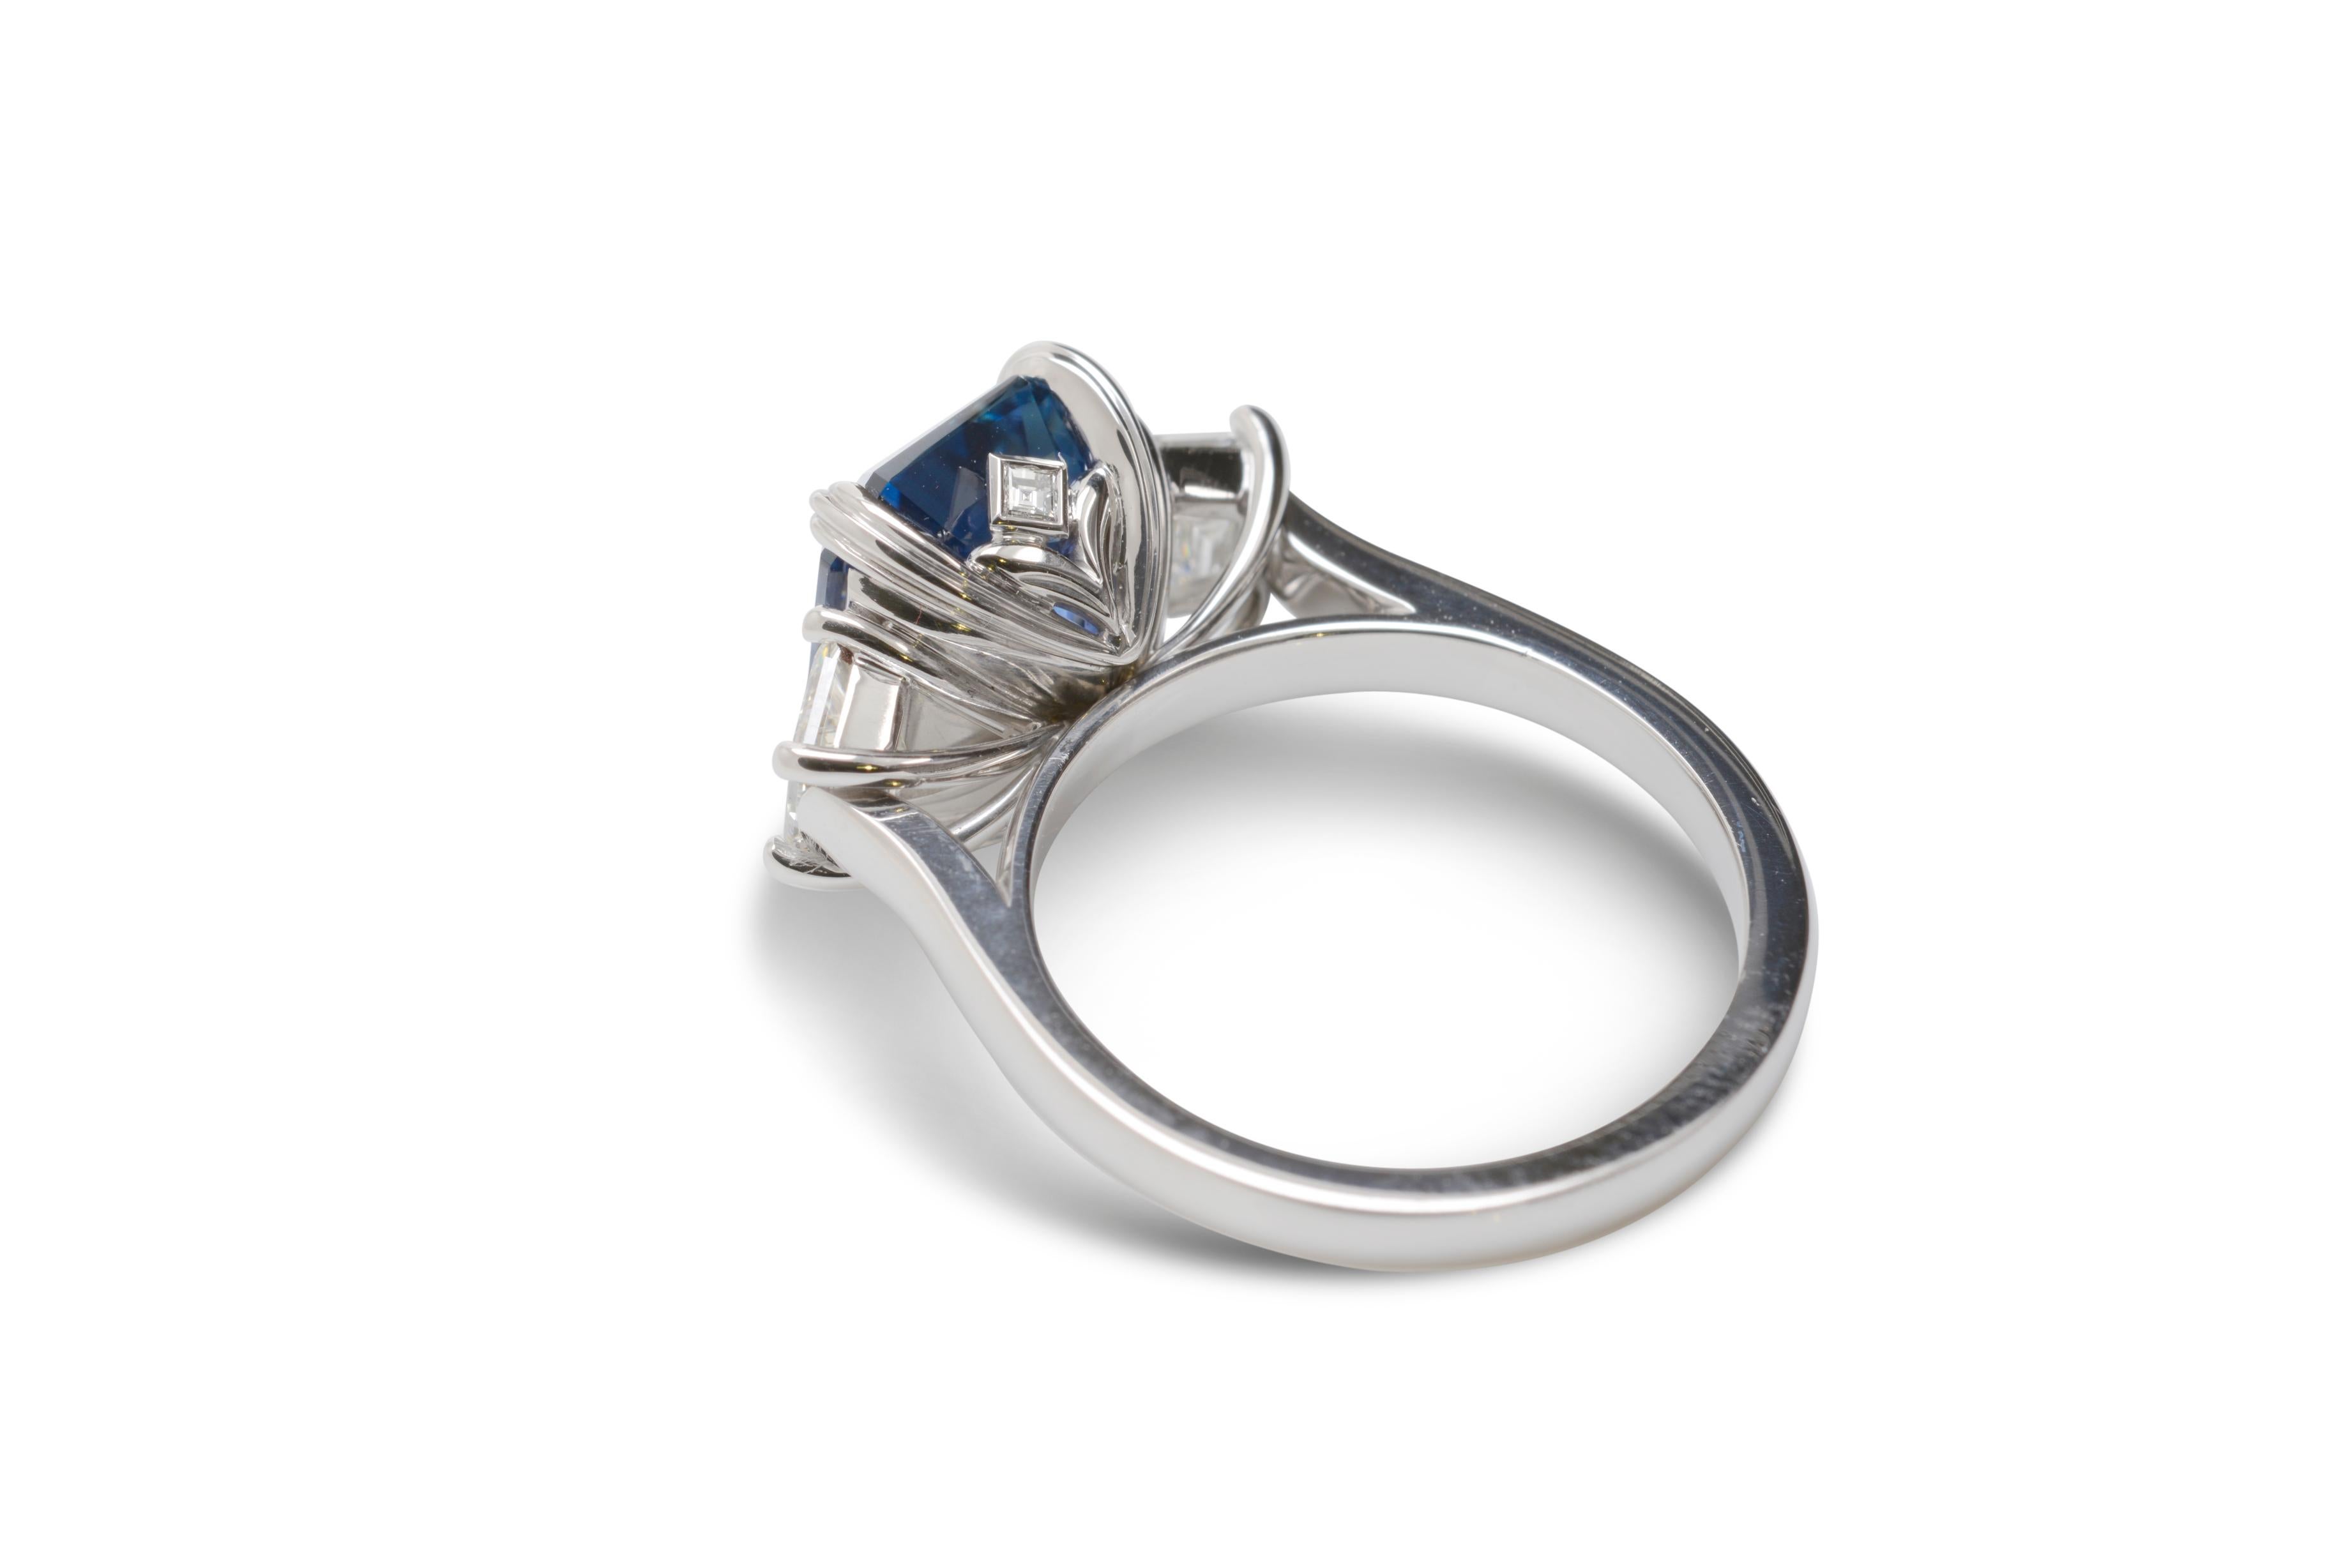 Its a very rare occasion that the opportunity to own a natural, unheated, vivid blue, emerald cut sapphire of 5.12 carats arises. This truly special gemstone has been handcrafted by Nicky Burles into a stunning three stone ring in 18 karat white